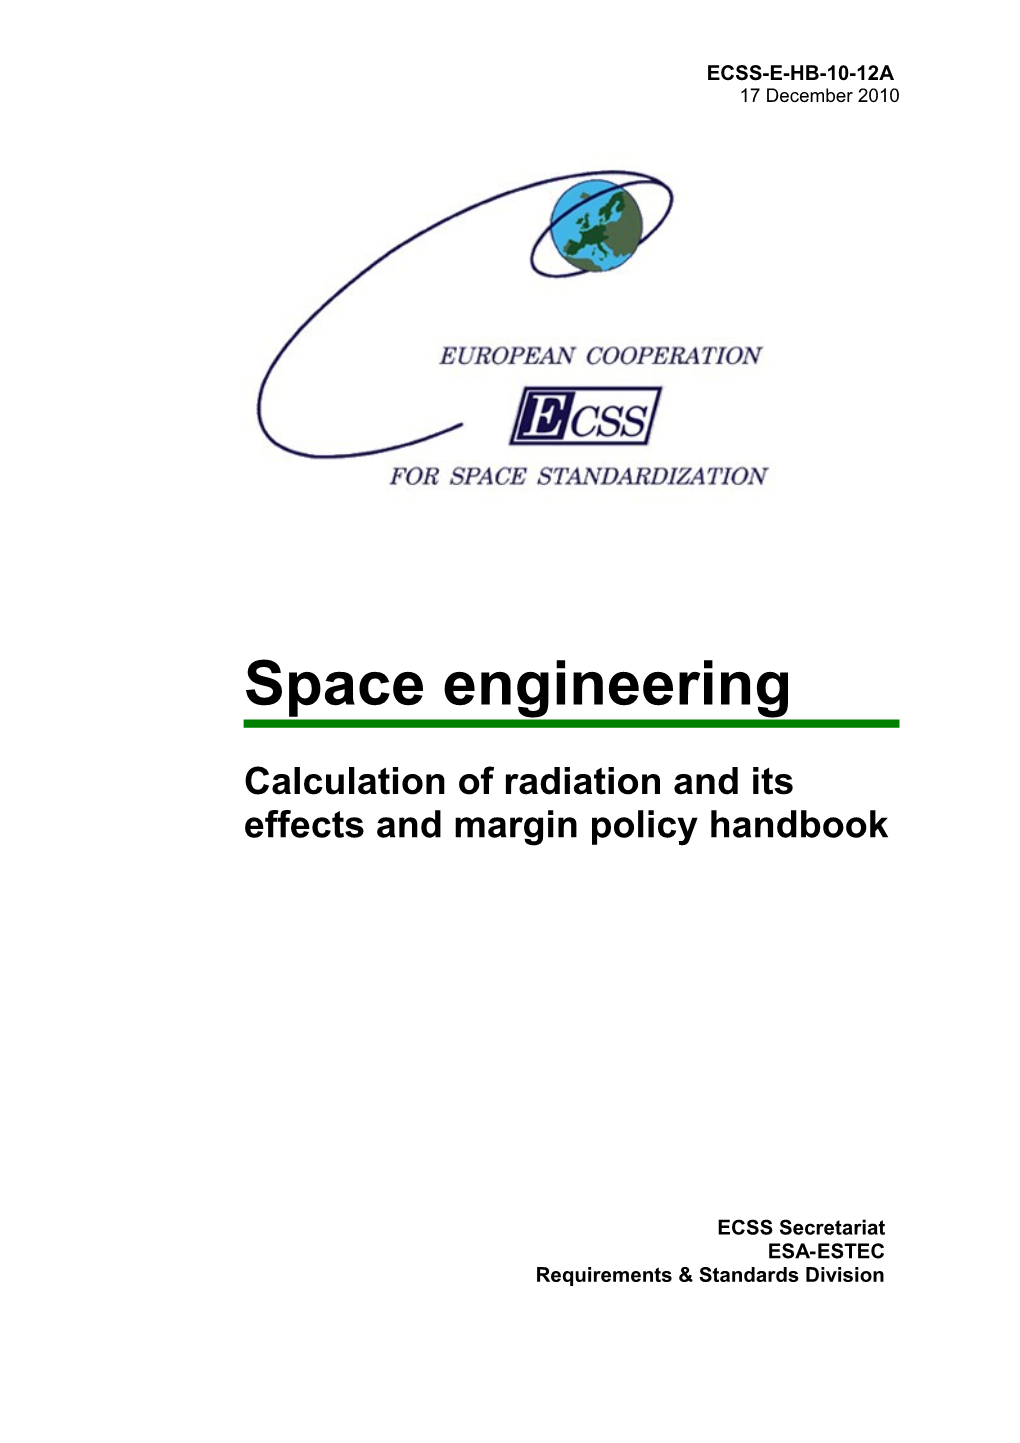 Calculation of Radiation and Its Effects and Margin Policy Handbook